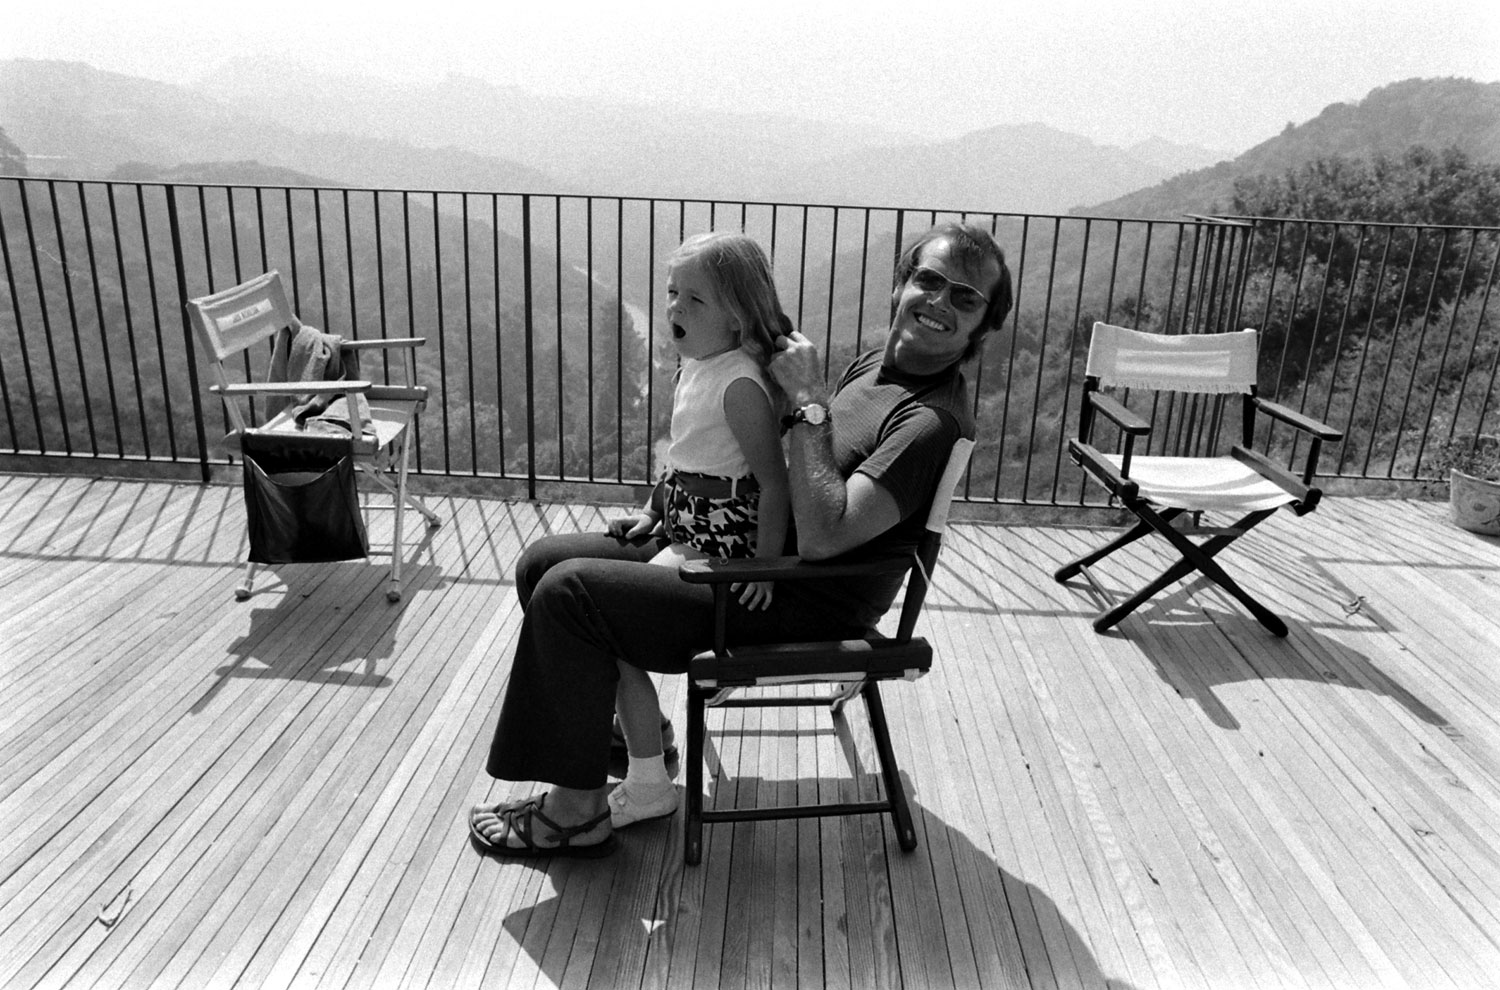 Jack Nicholson plays with his daughter, Jennifer, on the deck of his home overlooking Franklin Canyon, Los Angeles, 1969.